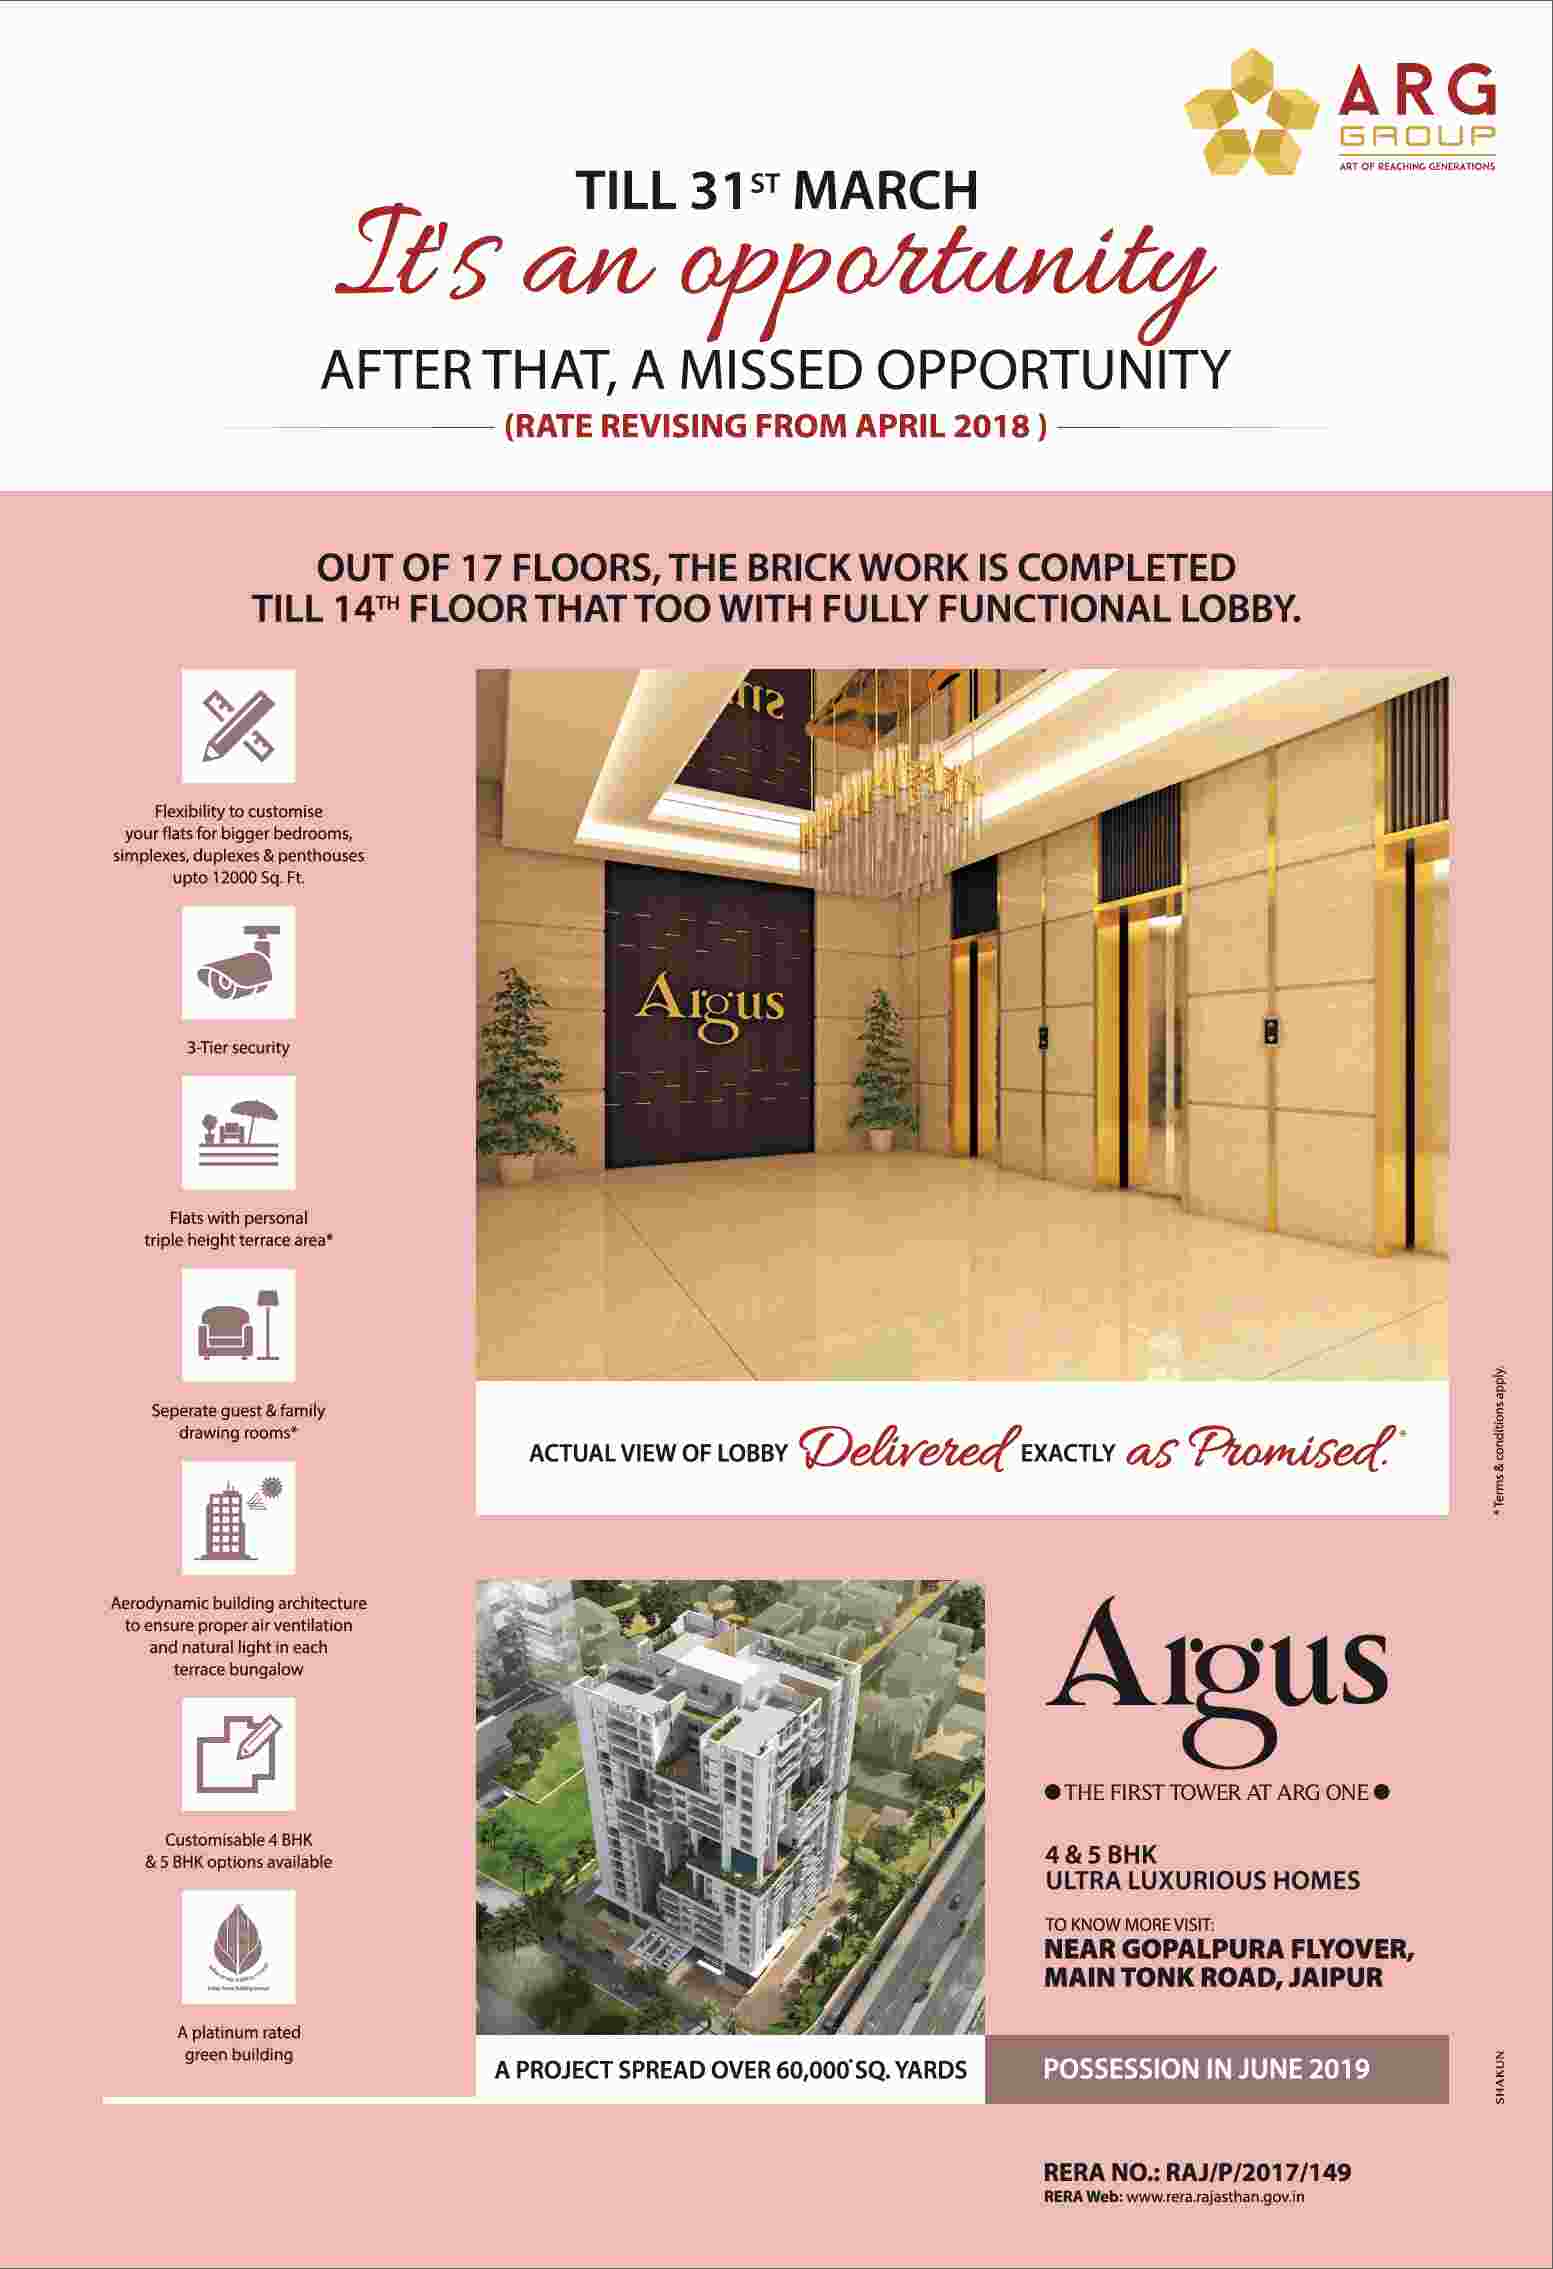 Book 4 & 5 BHK ultra luxurious homes at Argus, the first tower of ARG One in Jaipur Update